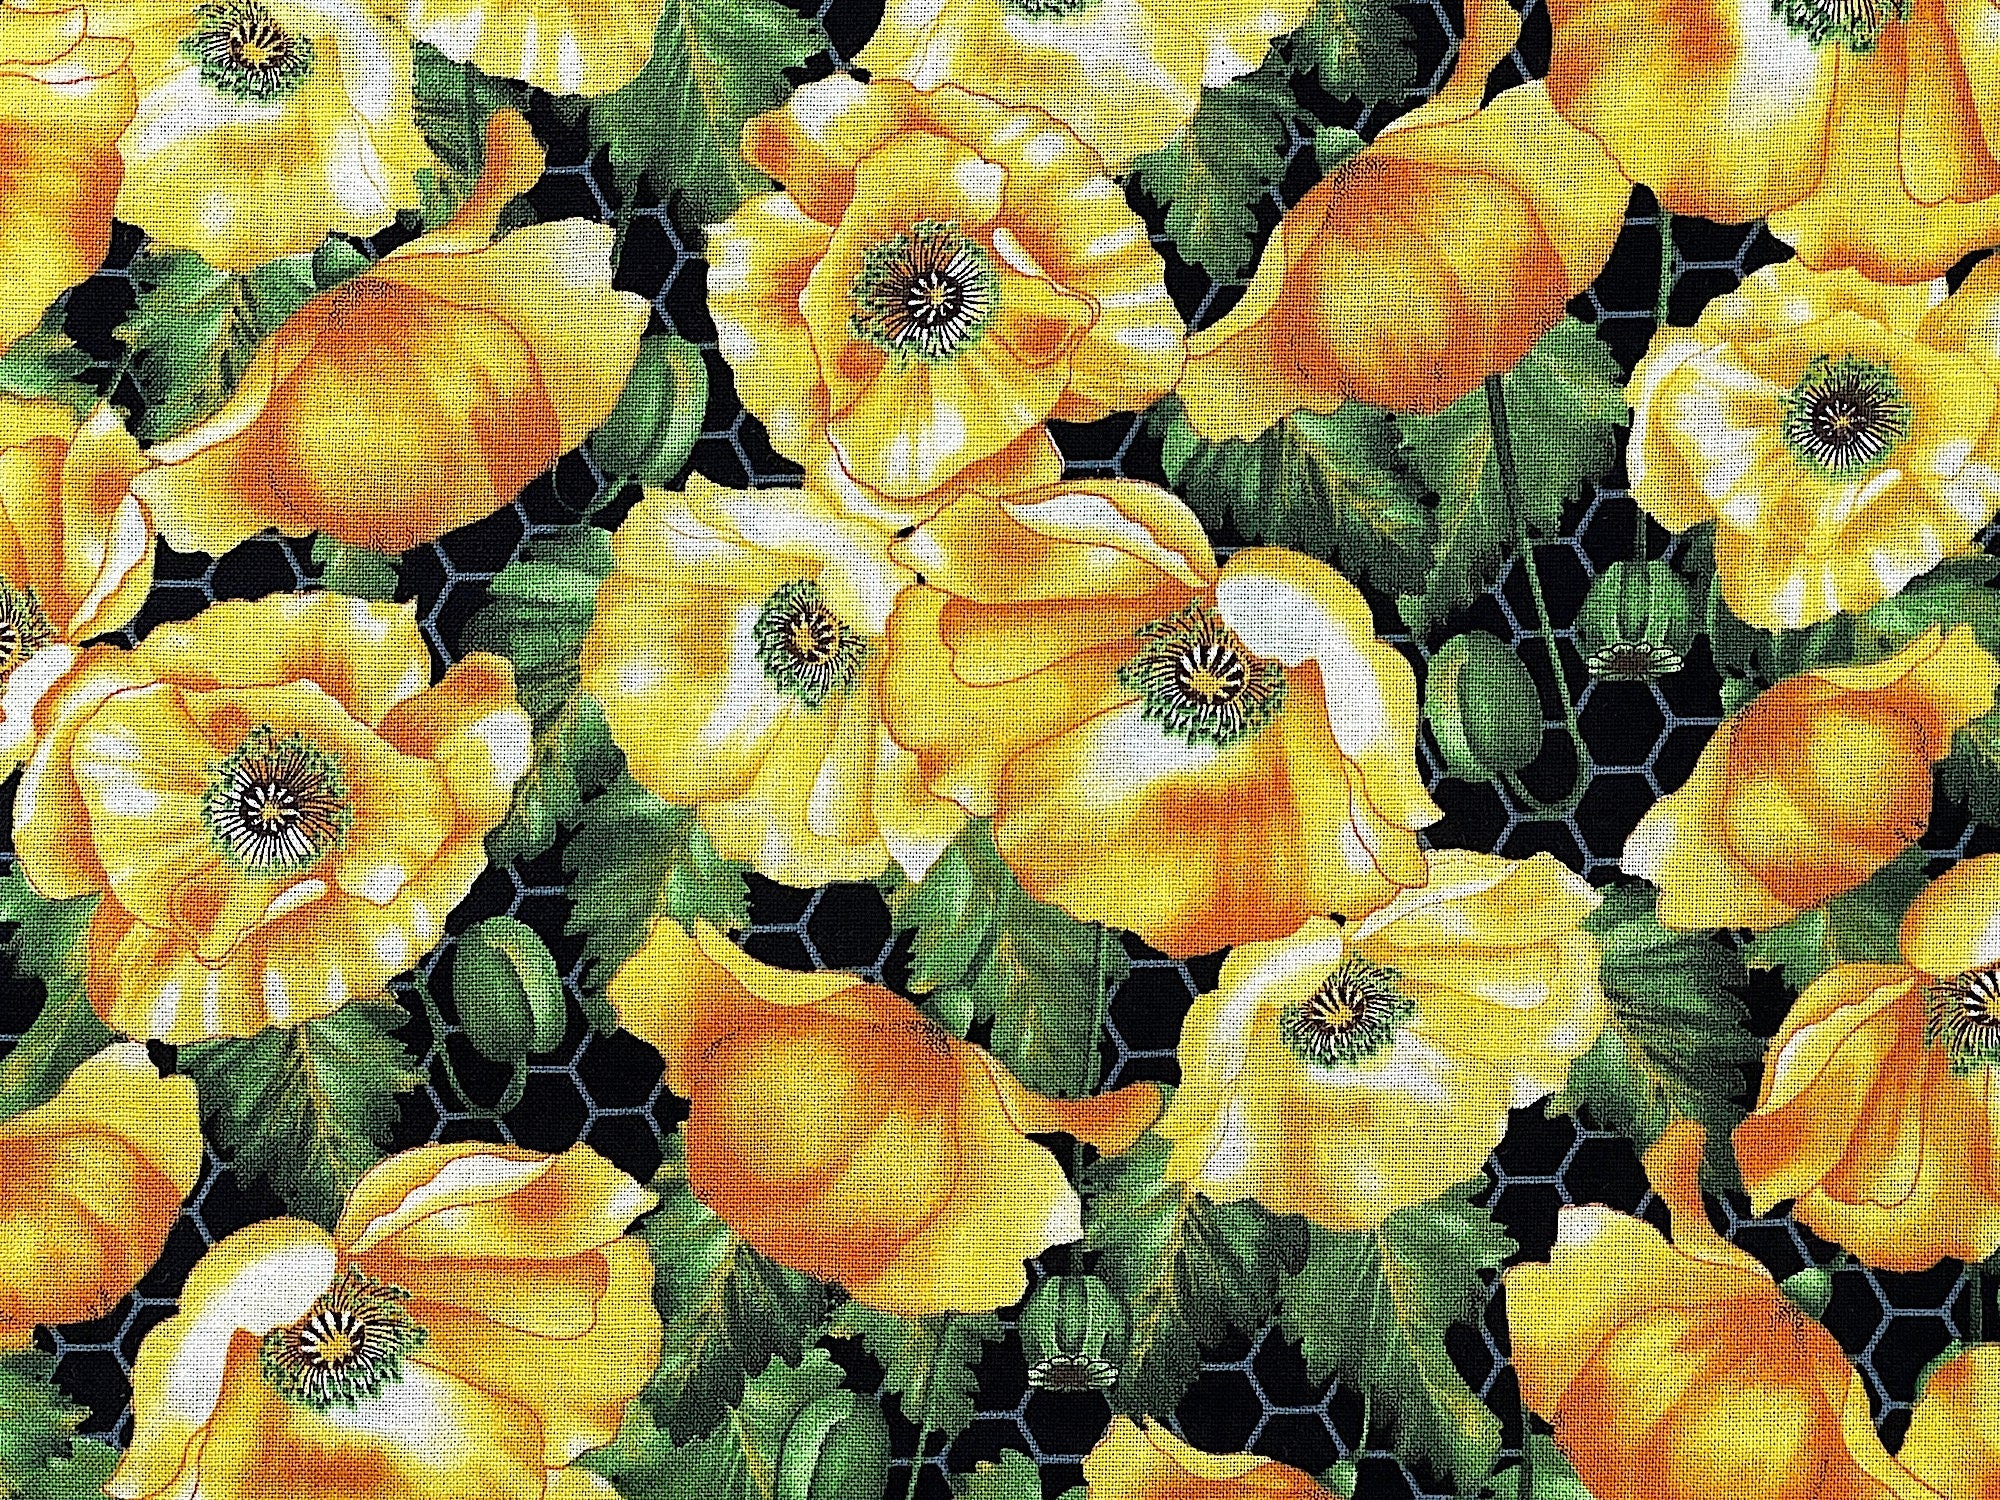 This flower fabric is covered with yellow poppies and green leaves